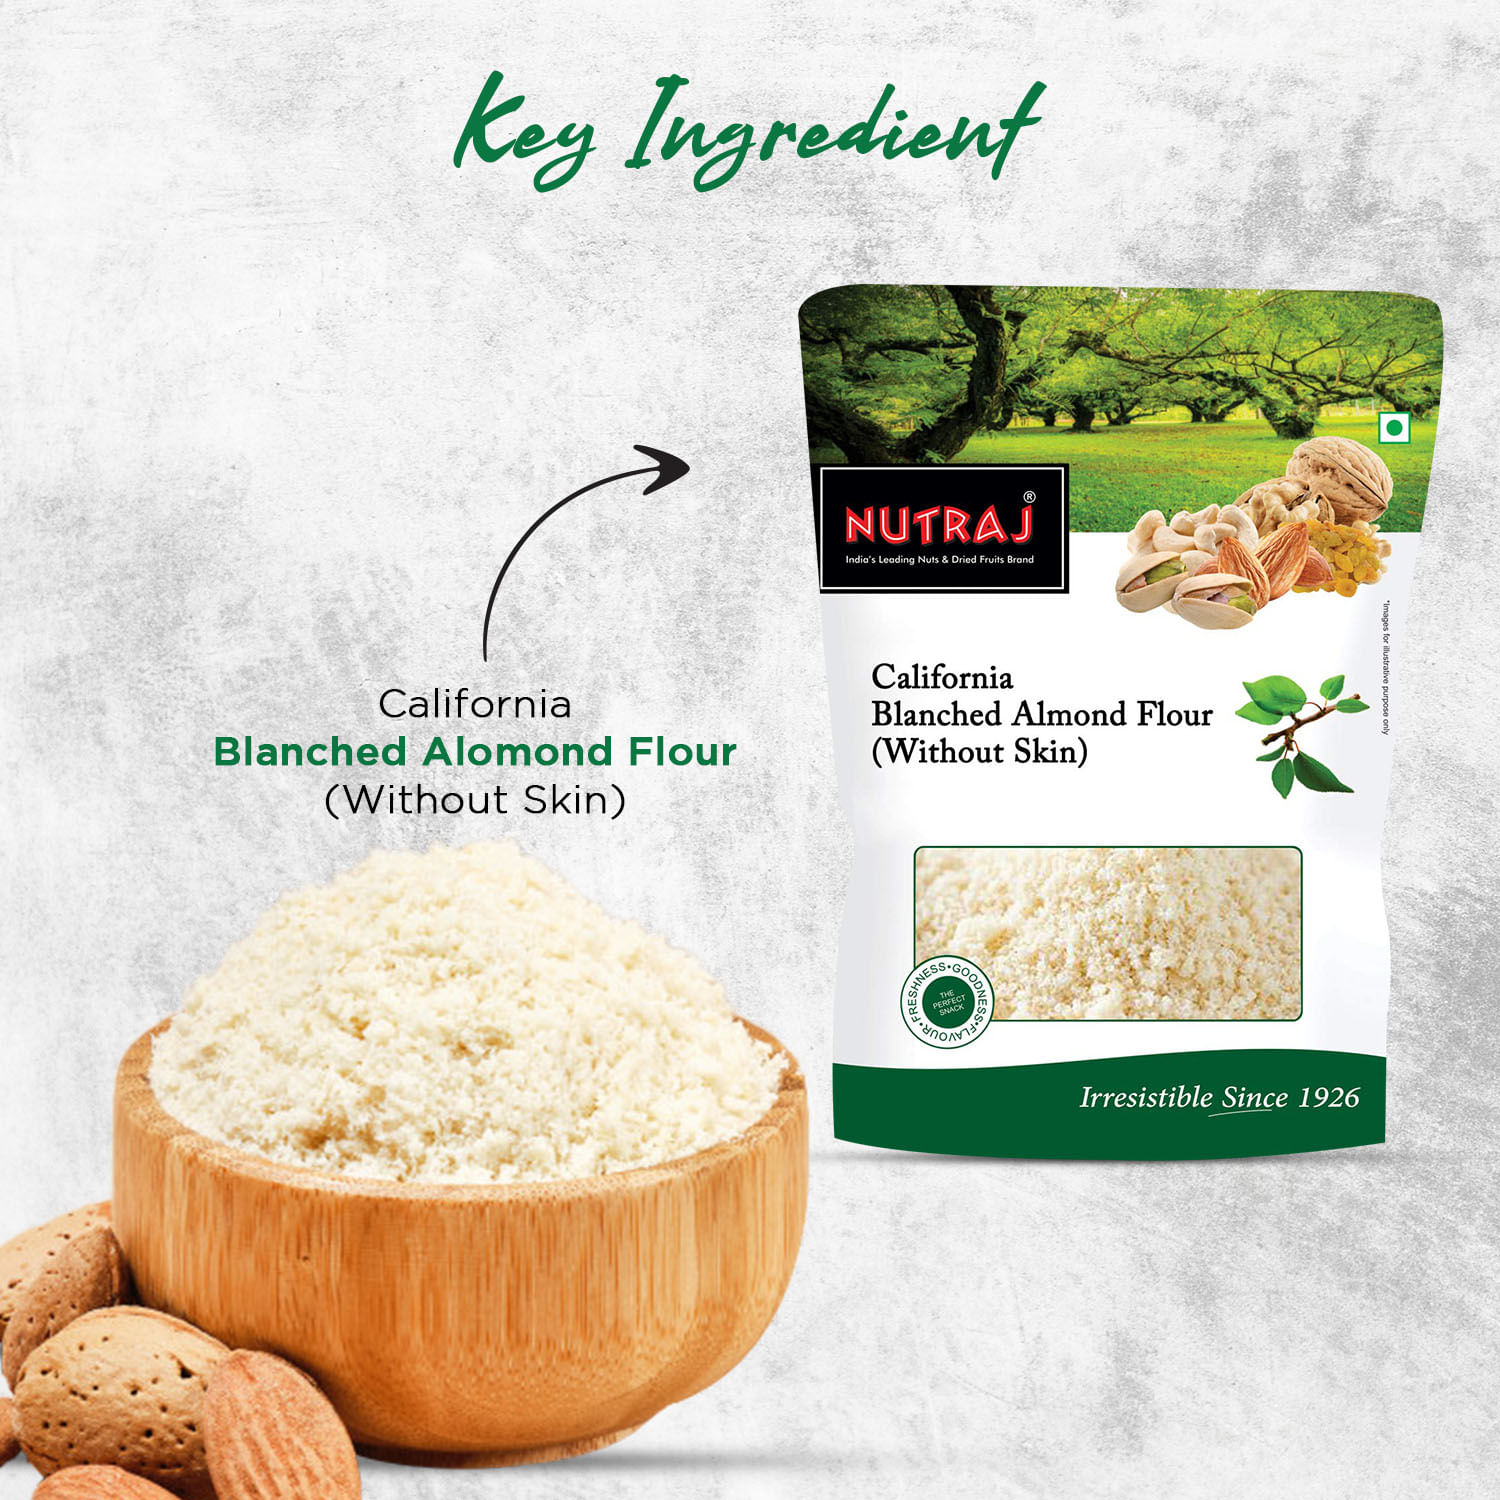 Nutraj California Blanched Almond Flour (Without Skin) 200g